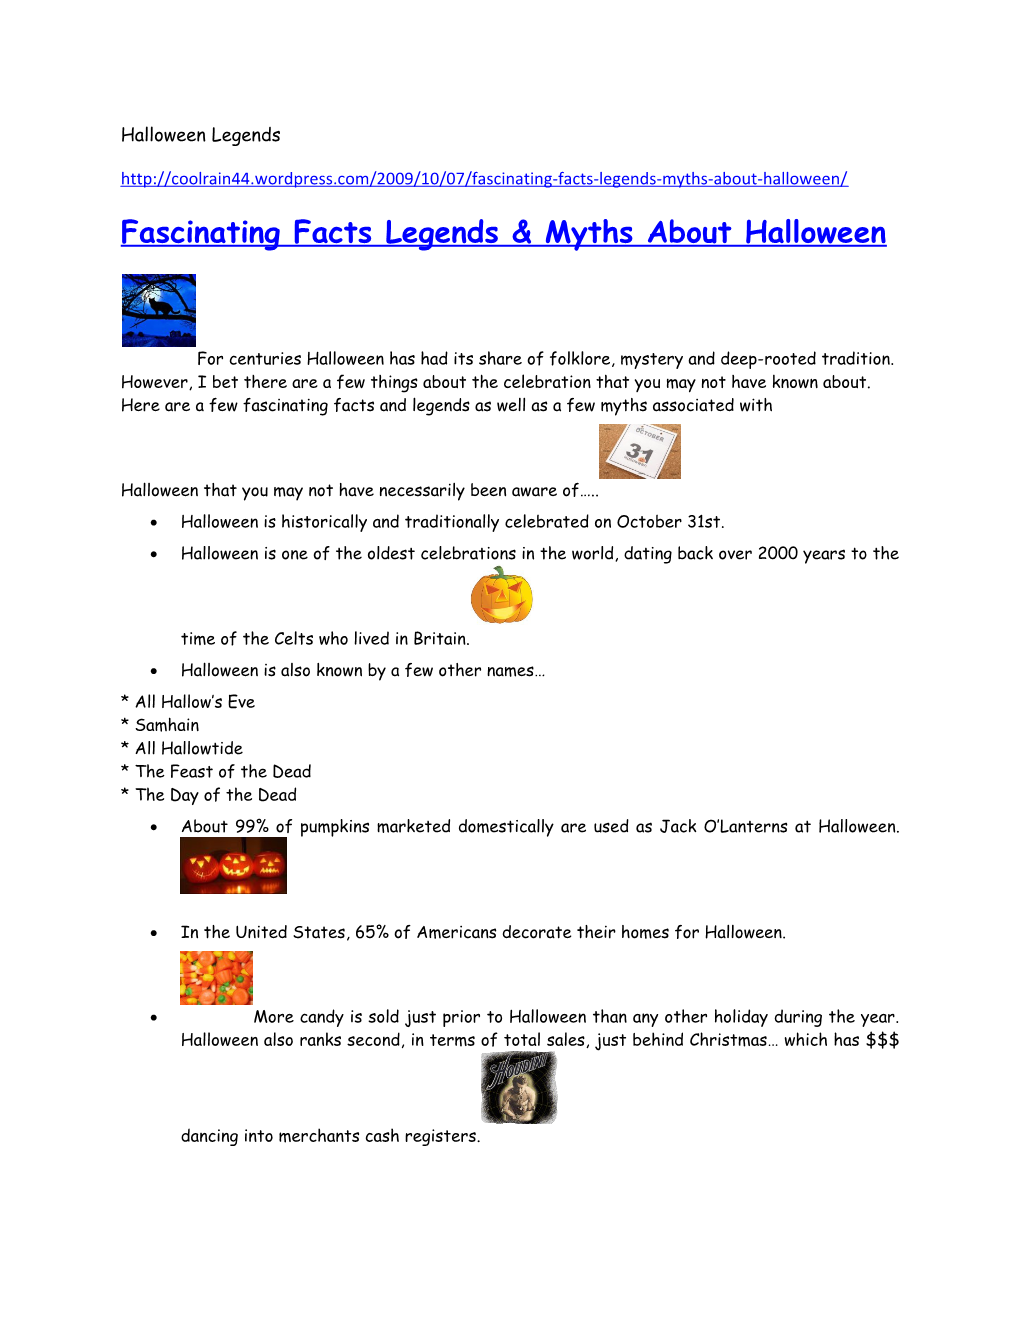 Fascinating Facts Legends & Myths About Halloween